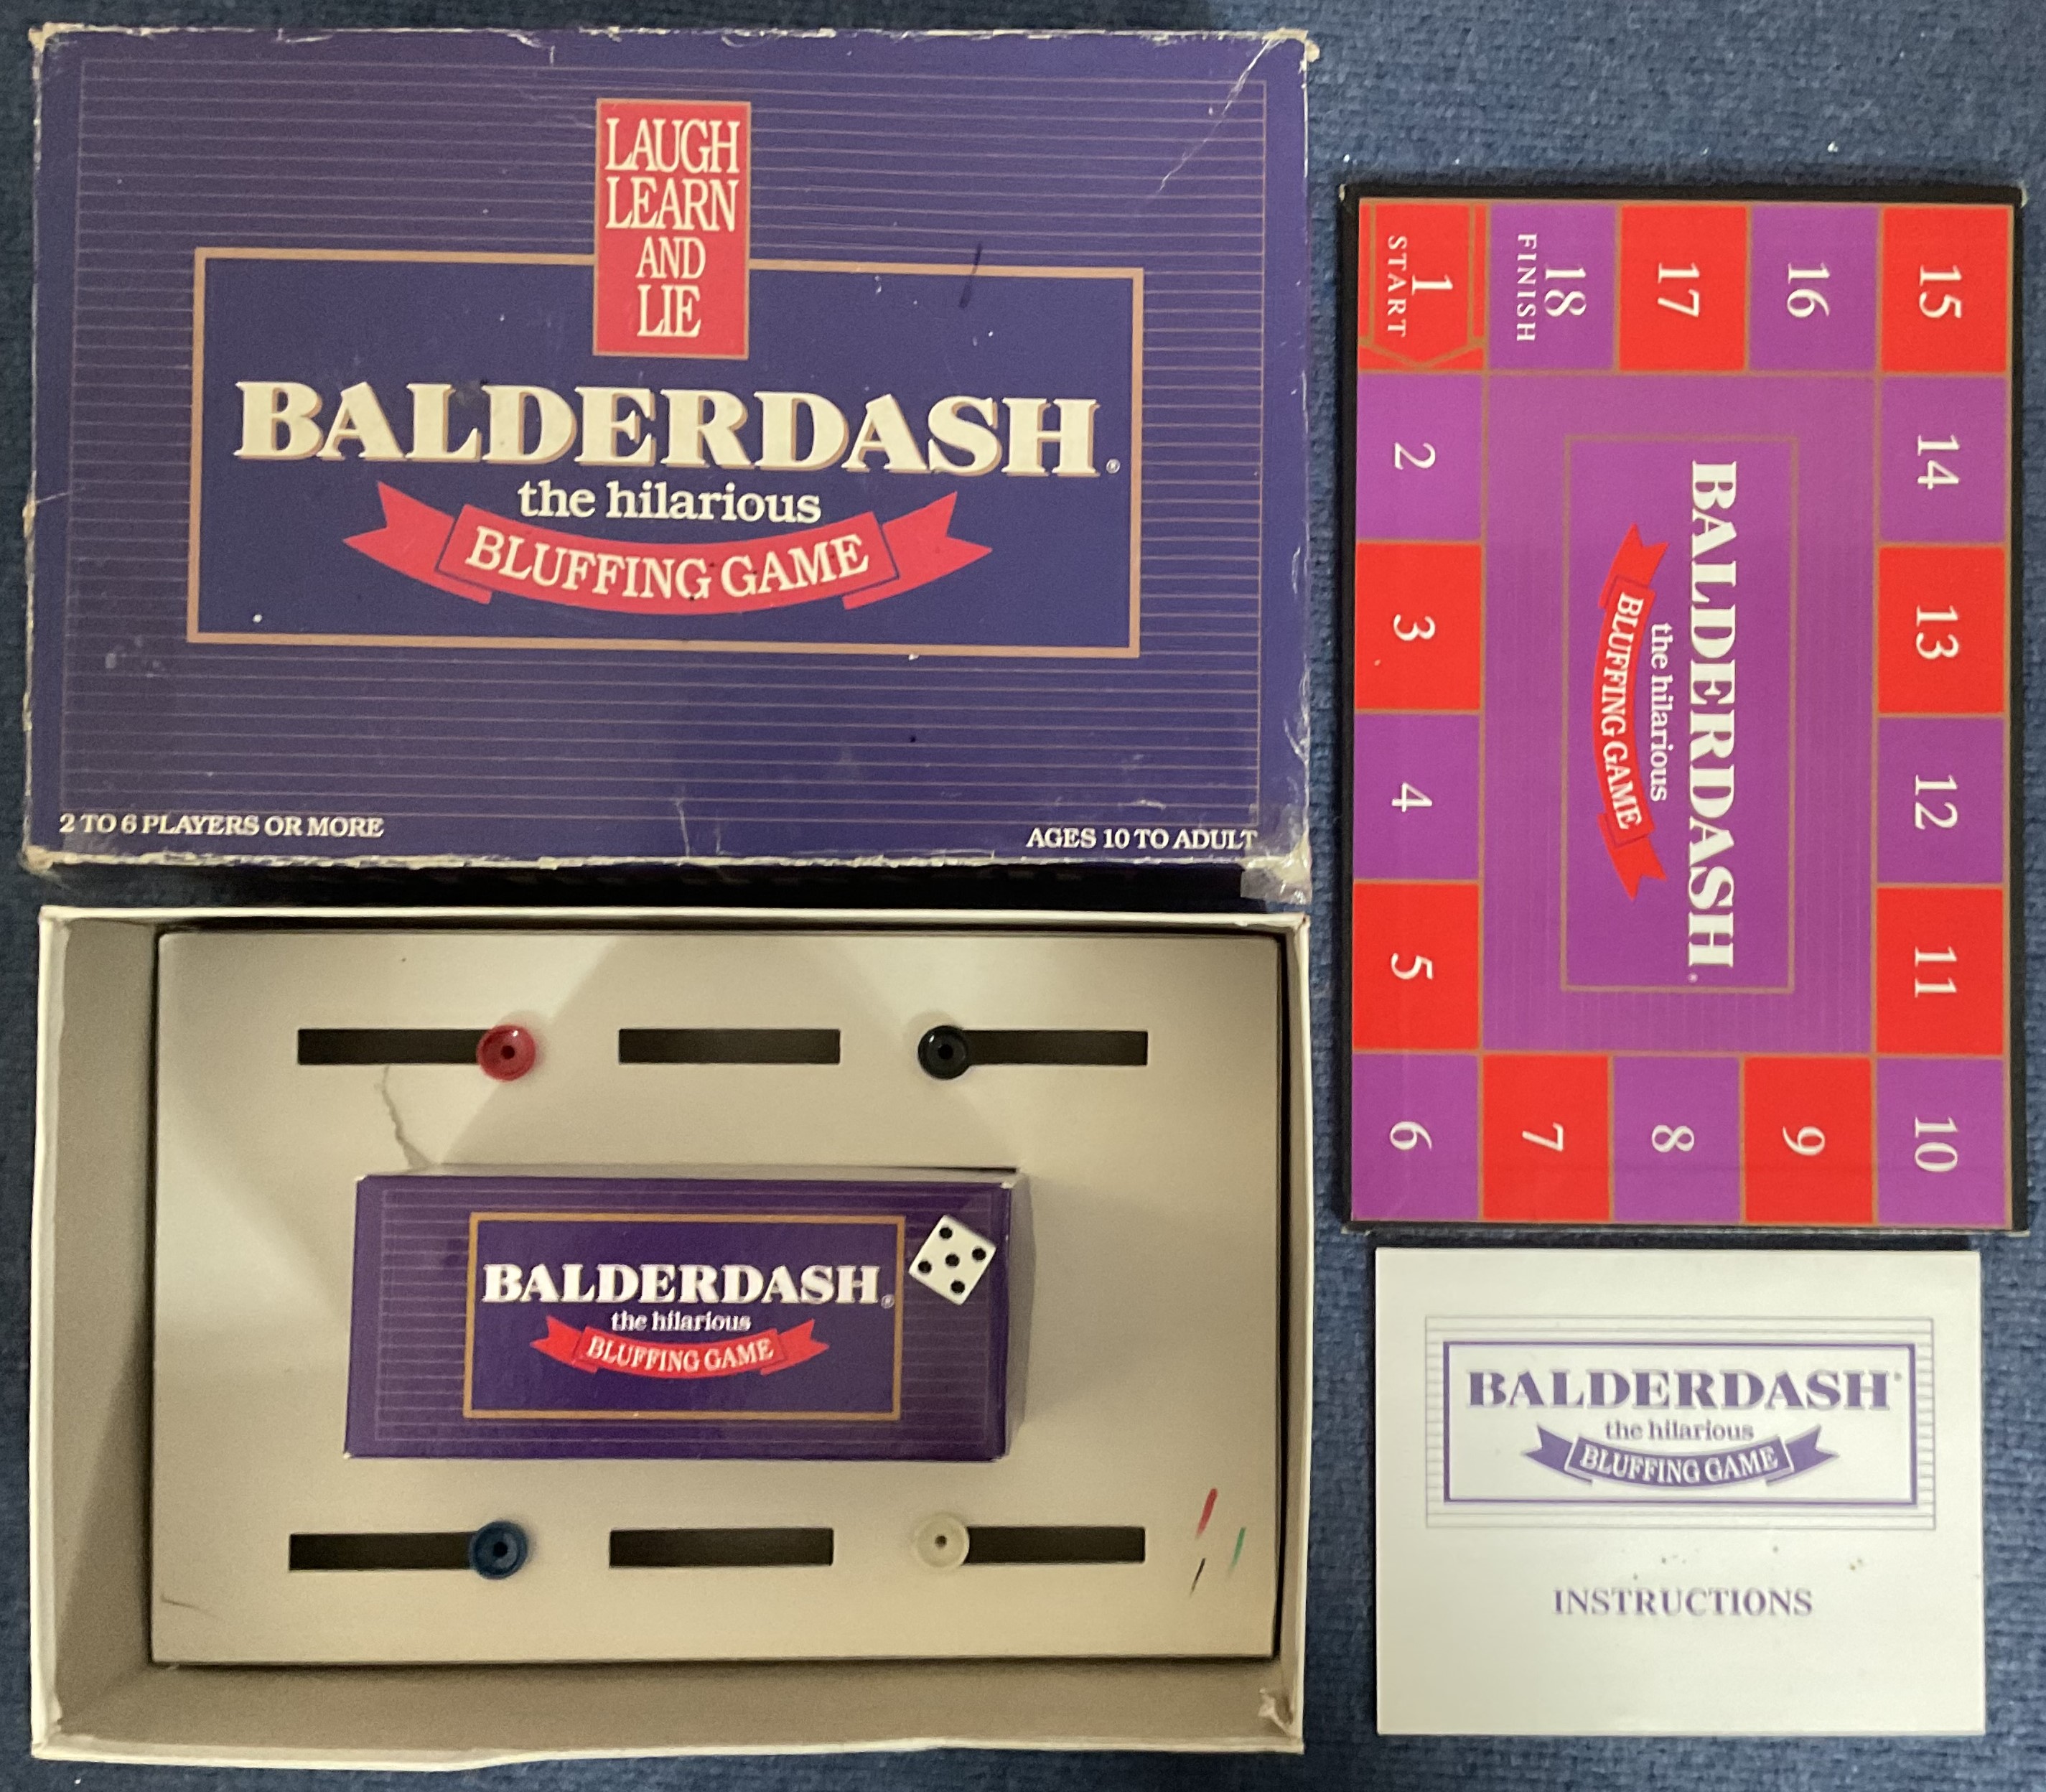 Balderdash The Hilarious Bluffing Game by Action Games and Toys Ltd 1984, appears to be complete